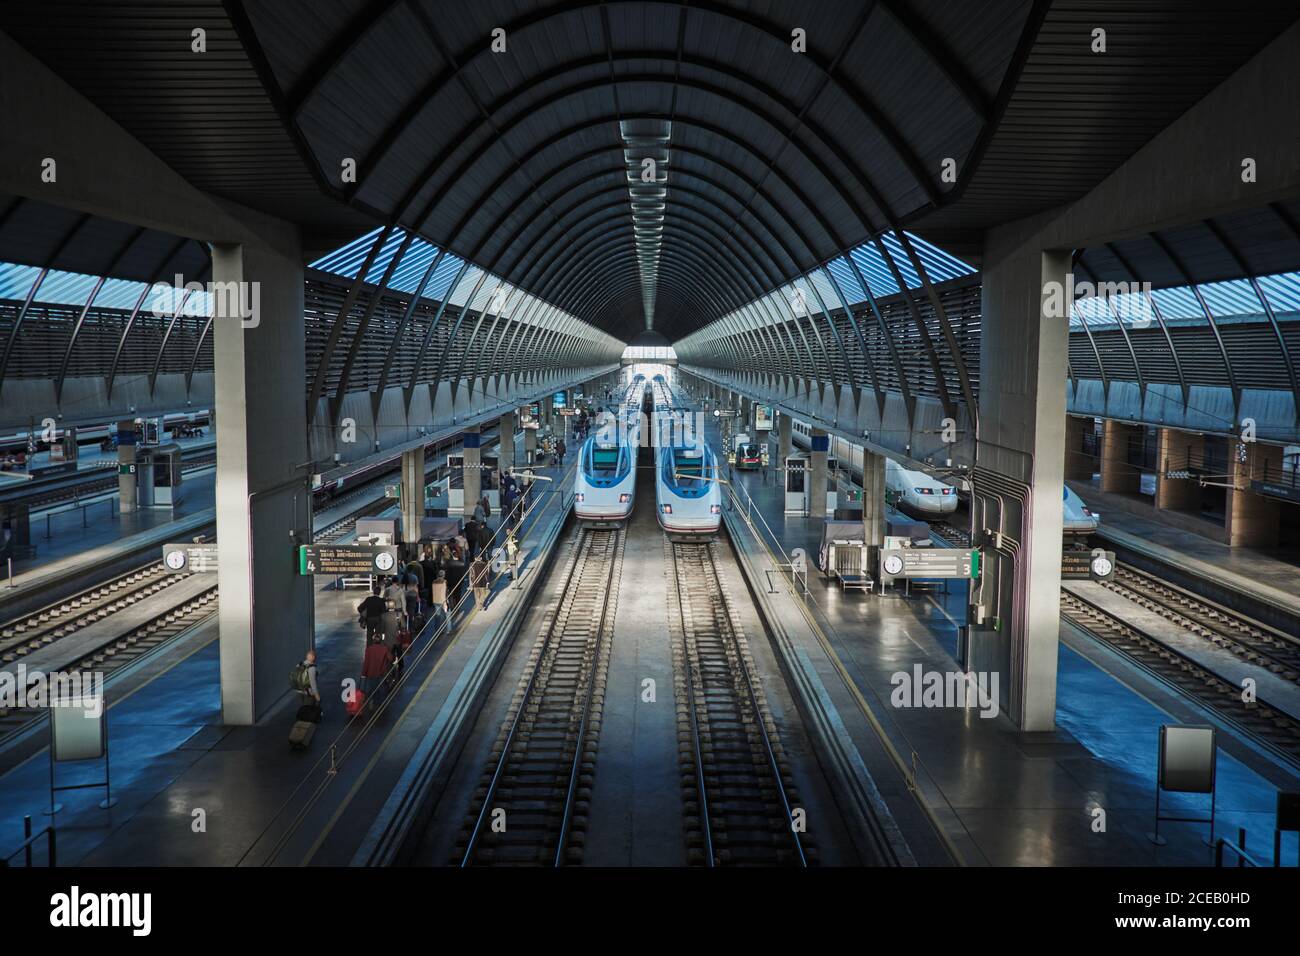 From above view of modern high speed trains moving on railway in spacious roofed railway station Stock Photo